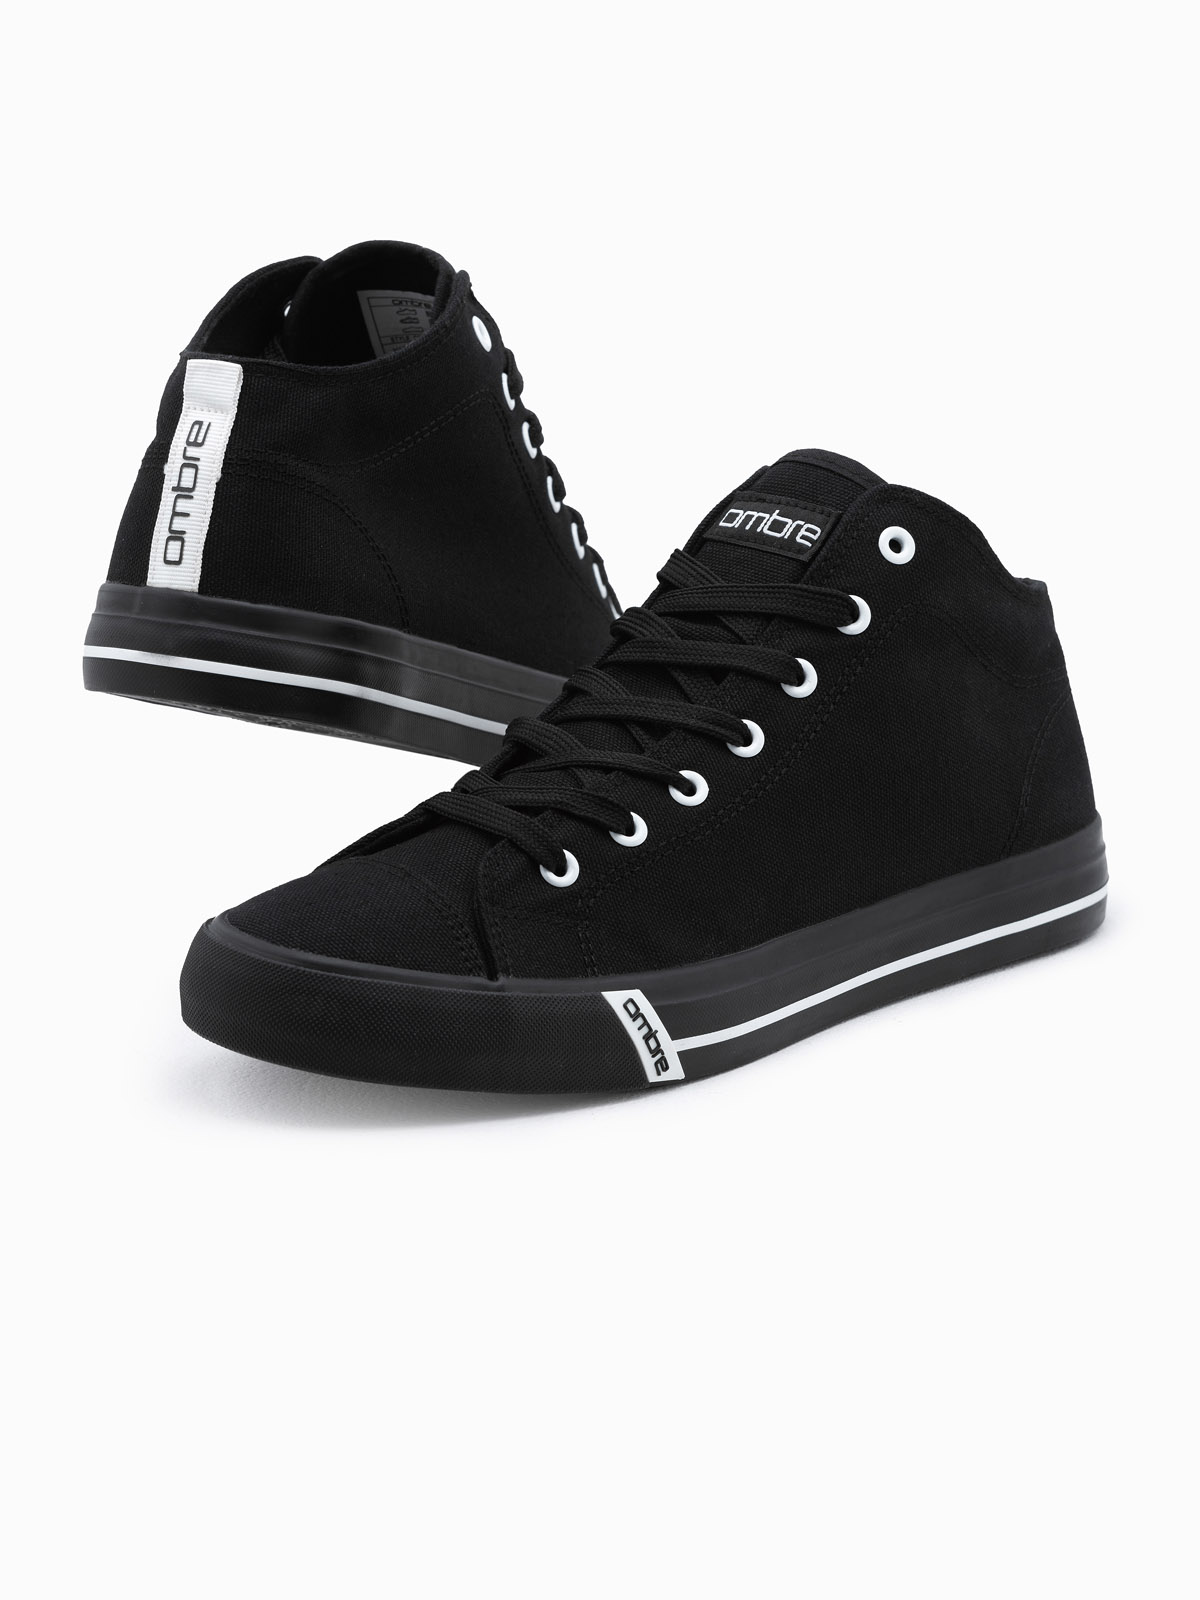 mens black high top trainers